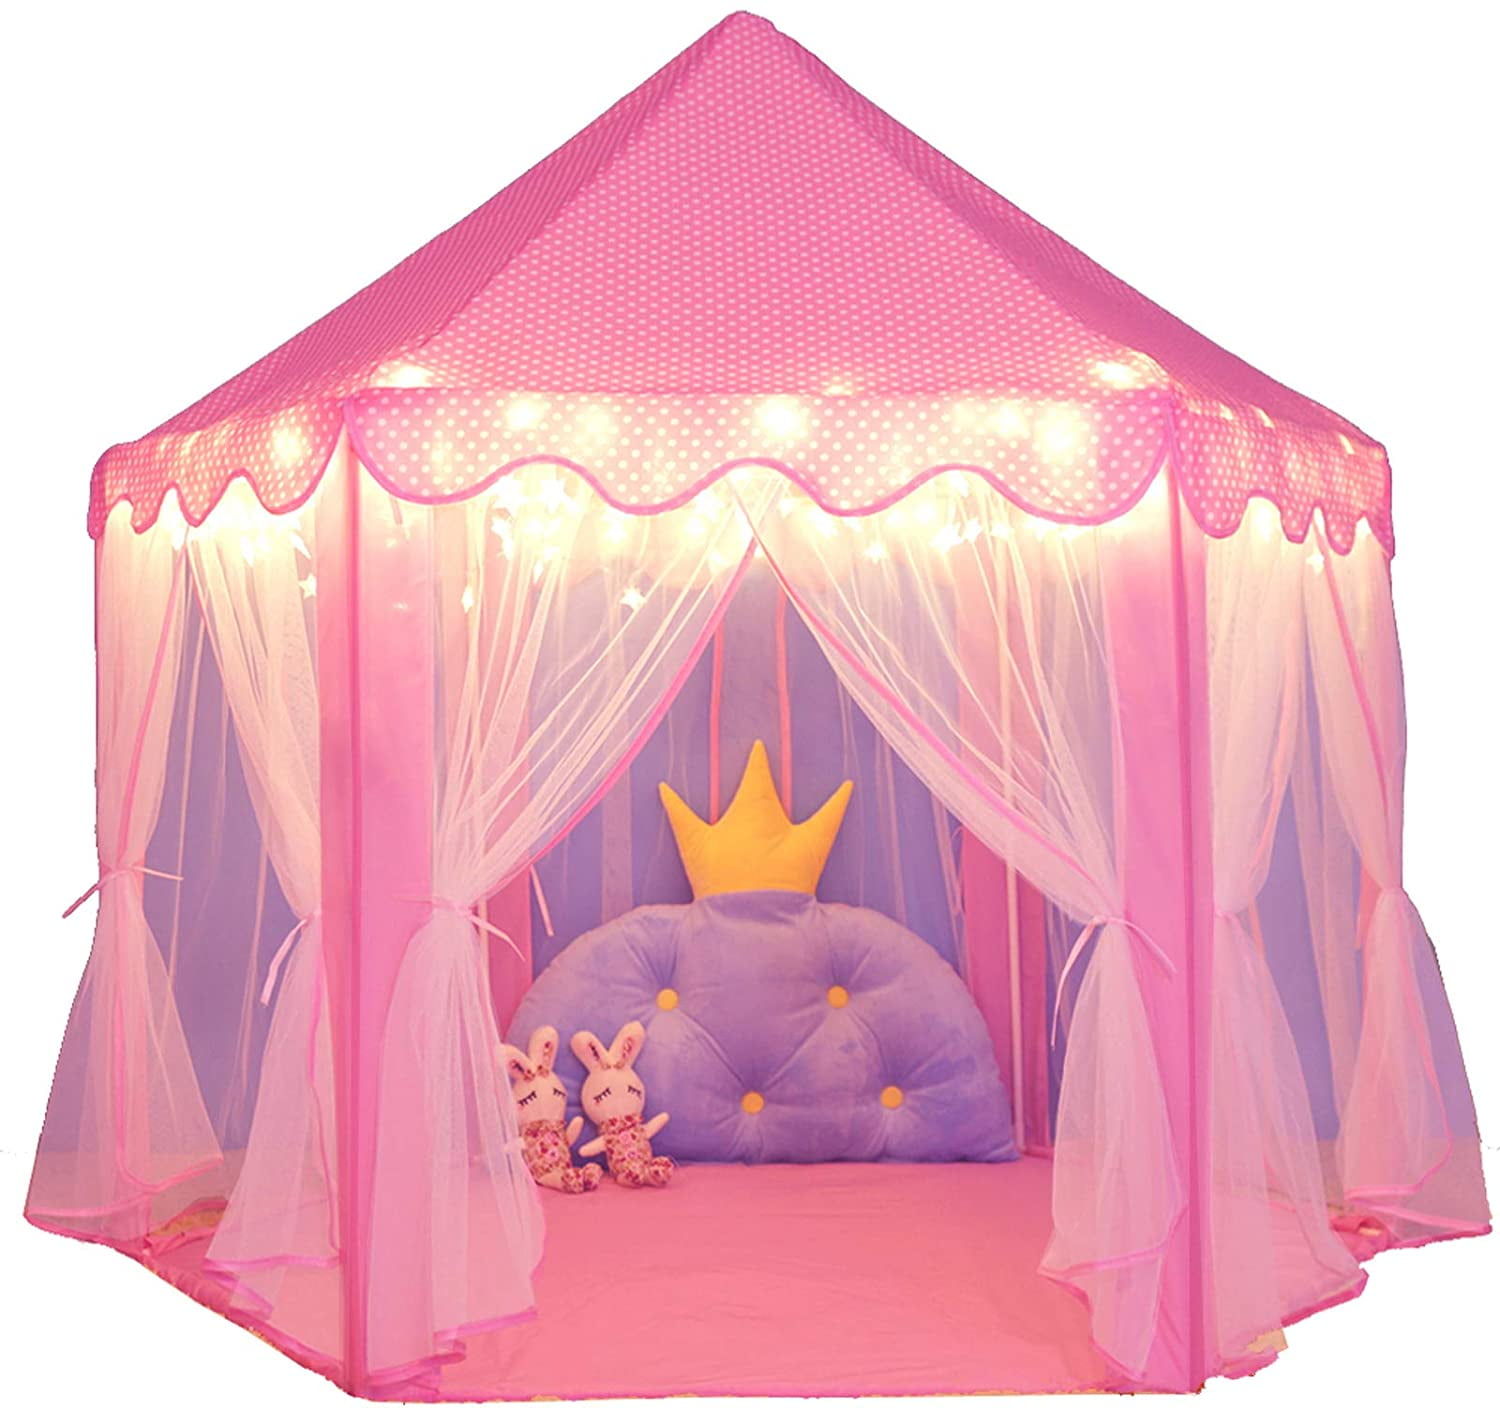 Kids Indoor Outdoor Play Tent for Boys and Girls Age 3+ with Sturdy PVC Frame. 